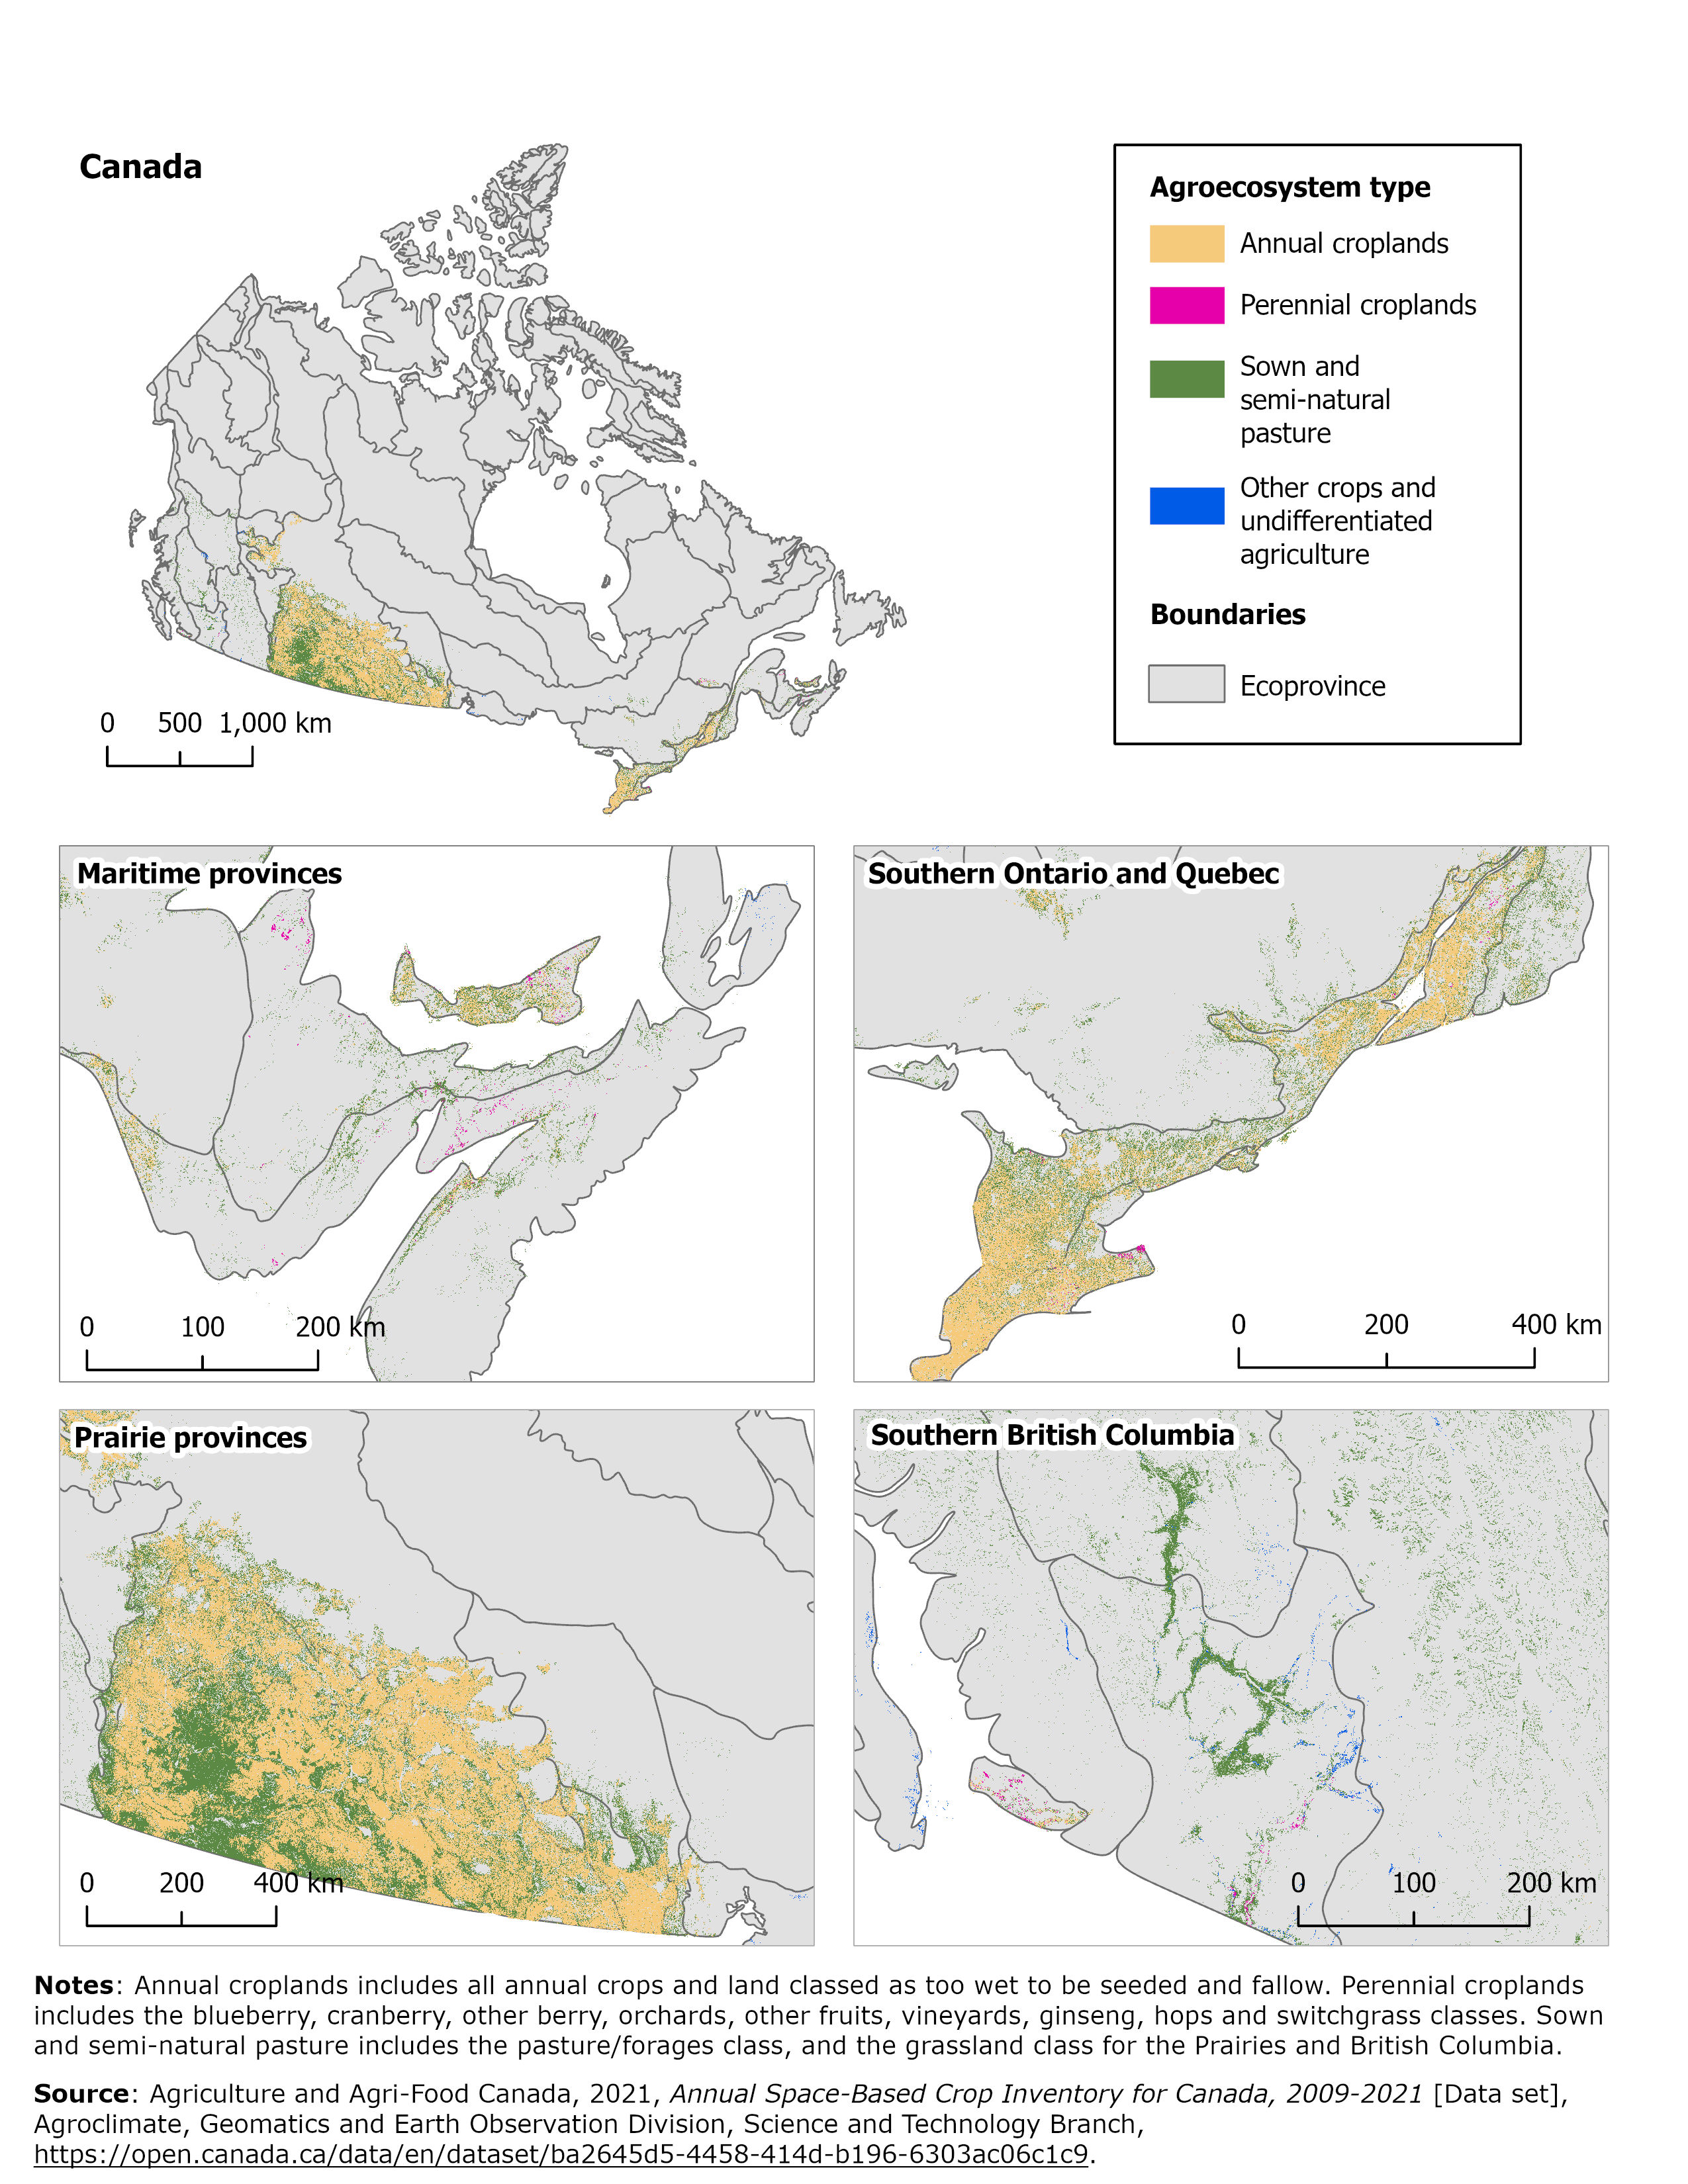 Map 2 Canadian agroecosystem extent, by agroecosystem type, 2021, based on Earth observation data